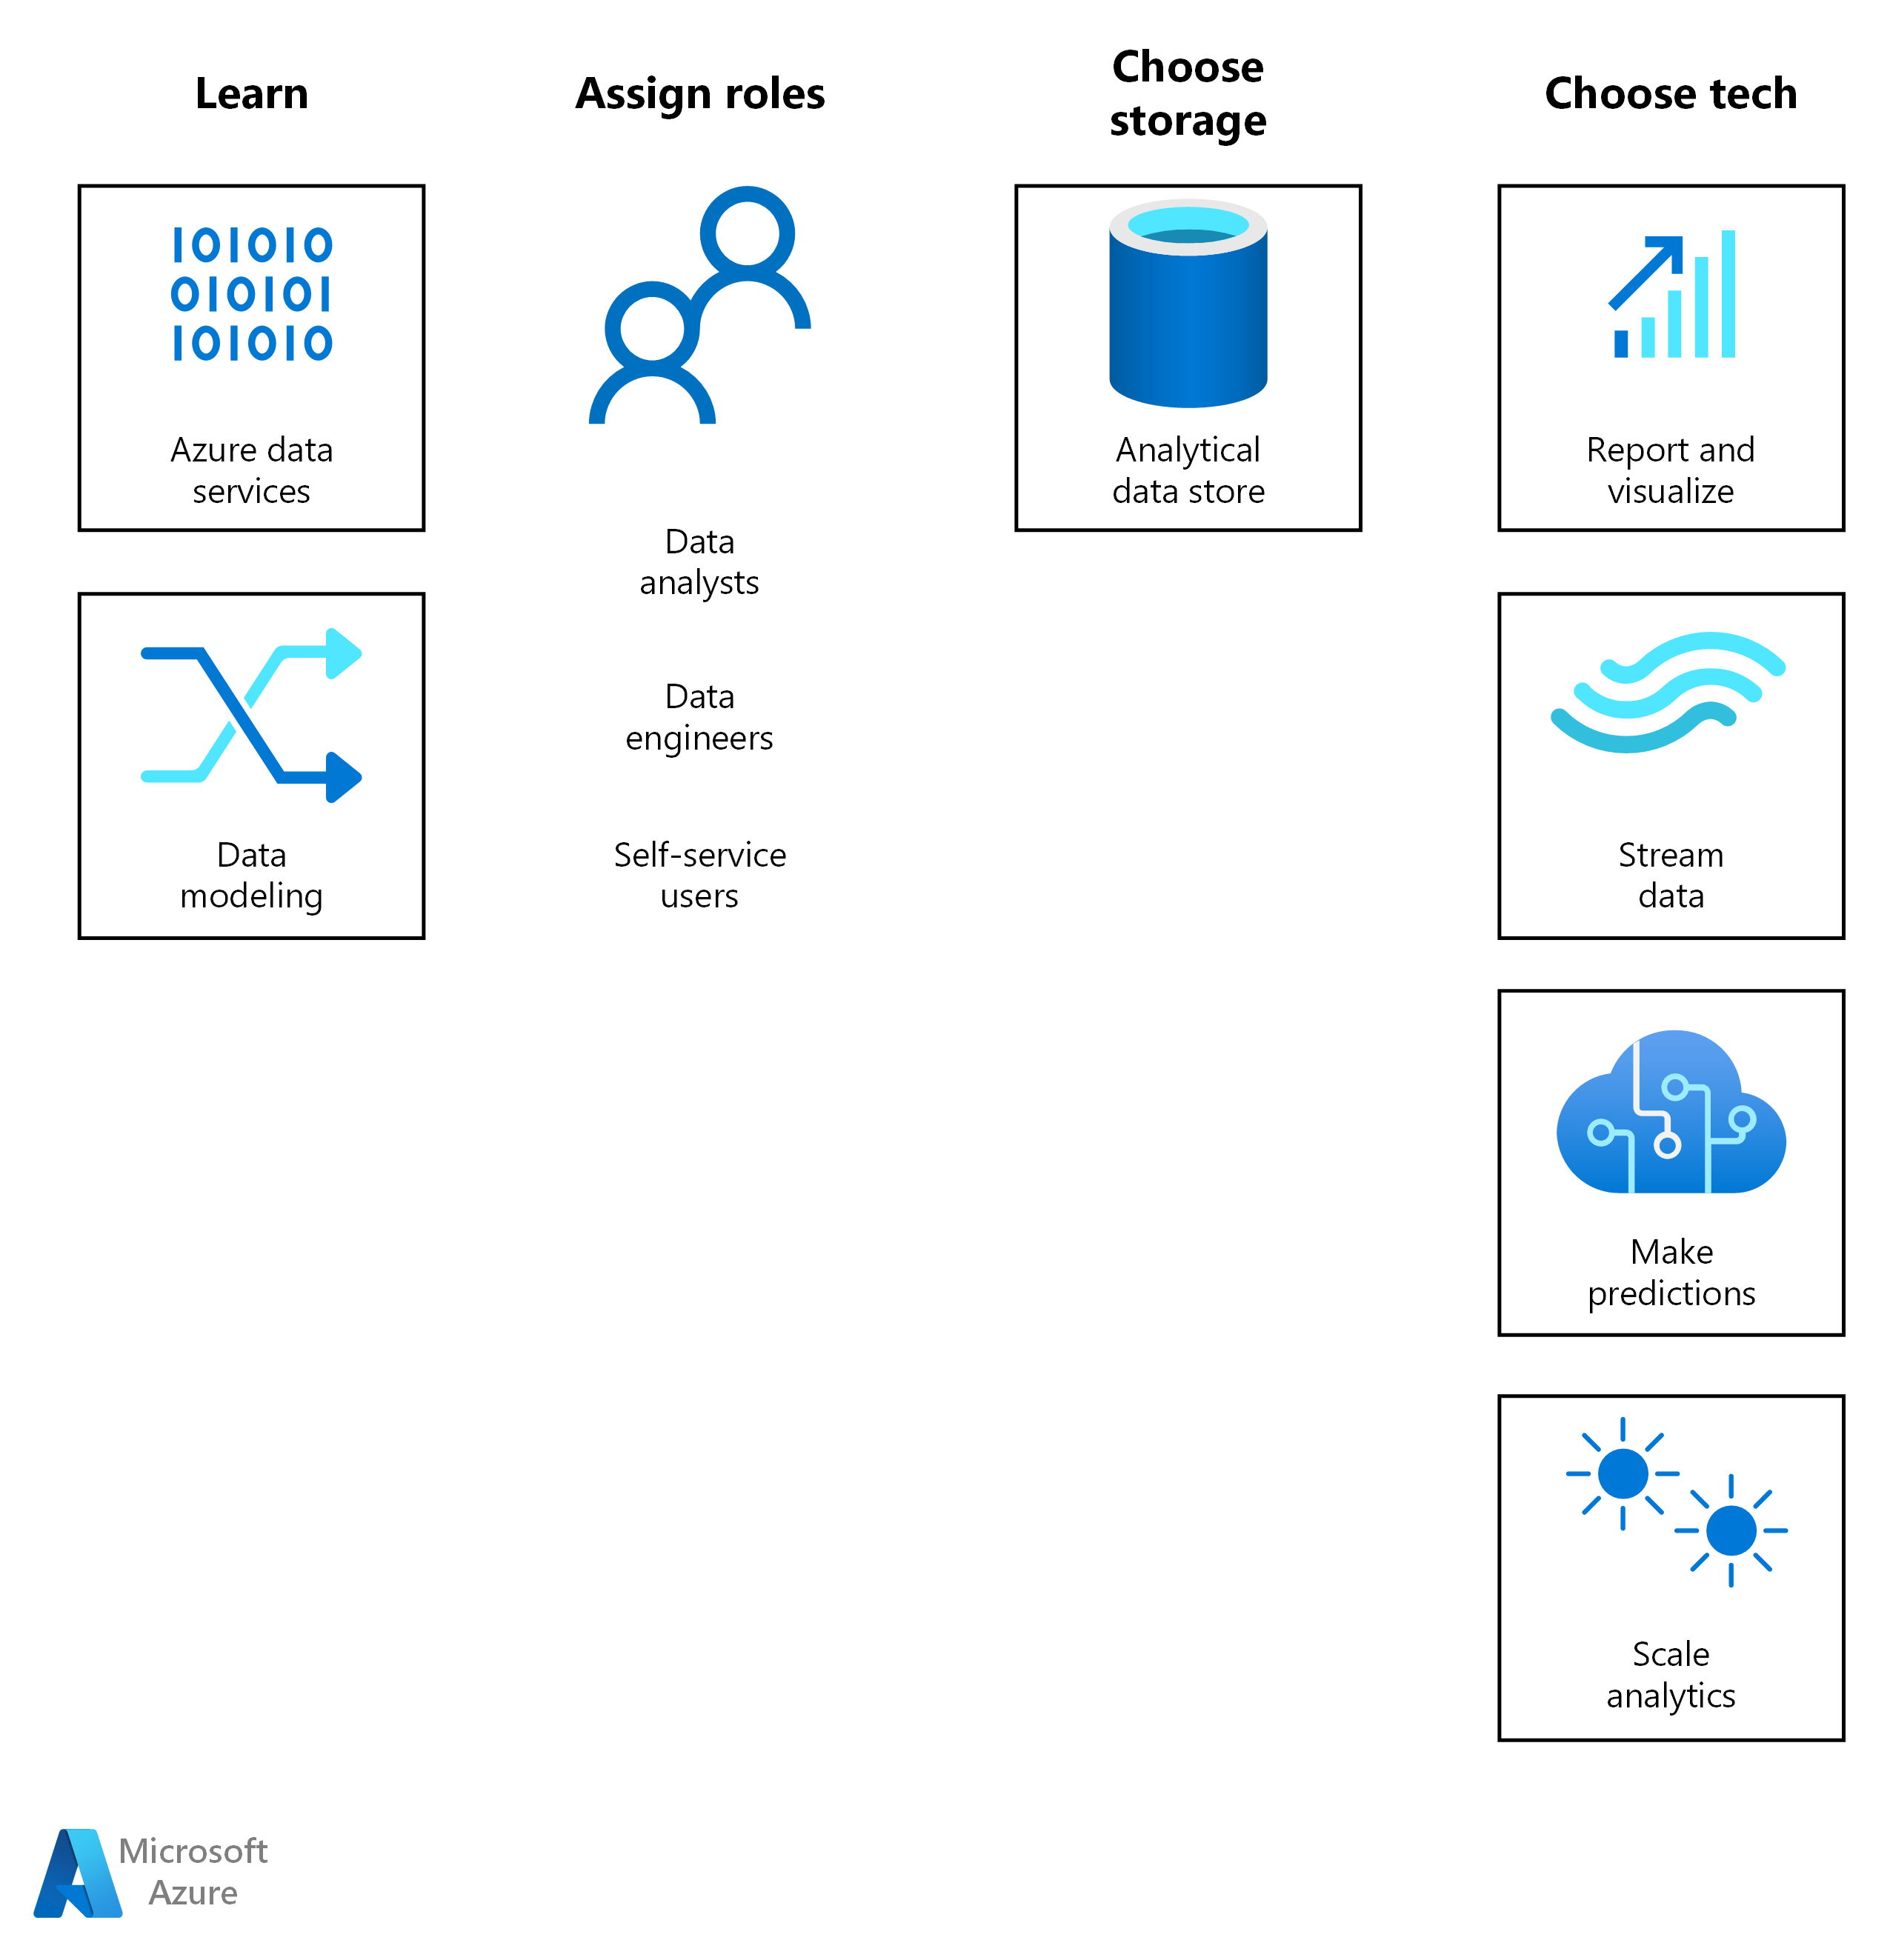 The solution journey for analytics on Azure starts with learning and assigning roles. Next, choose a storage solution and an Azure BI or AI technology for the workload.